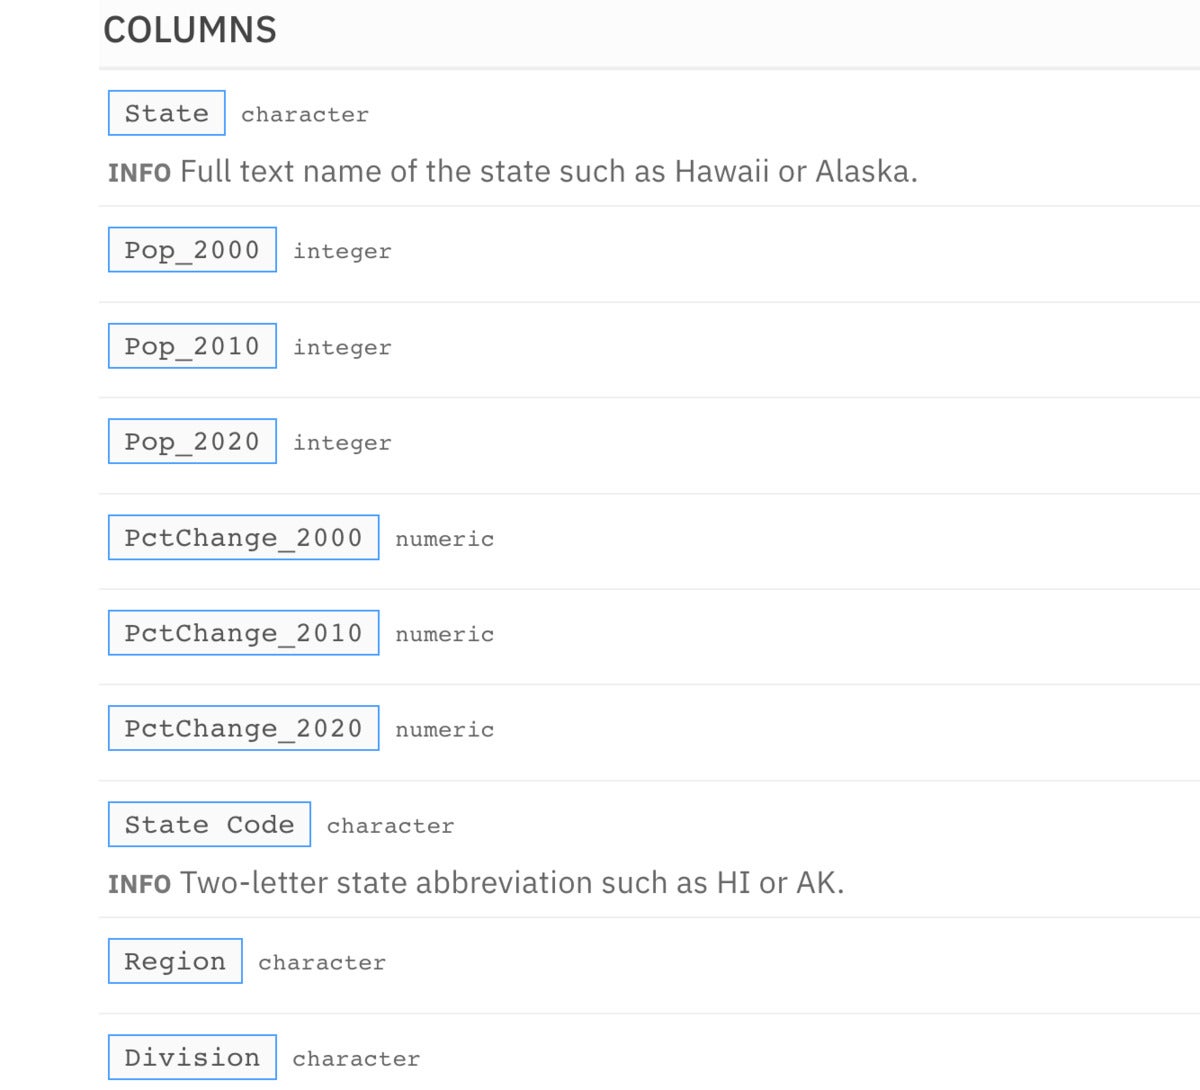 informant now includes info for State and State Code columns. Others show only data type